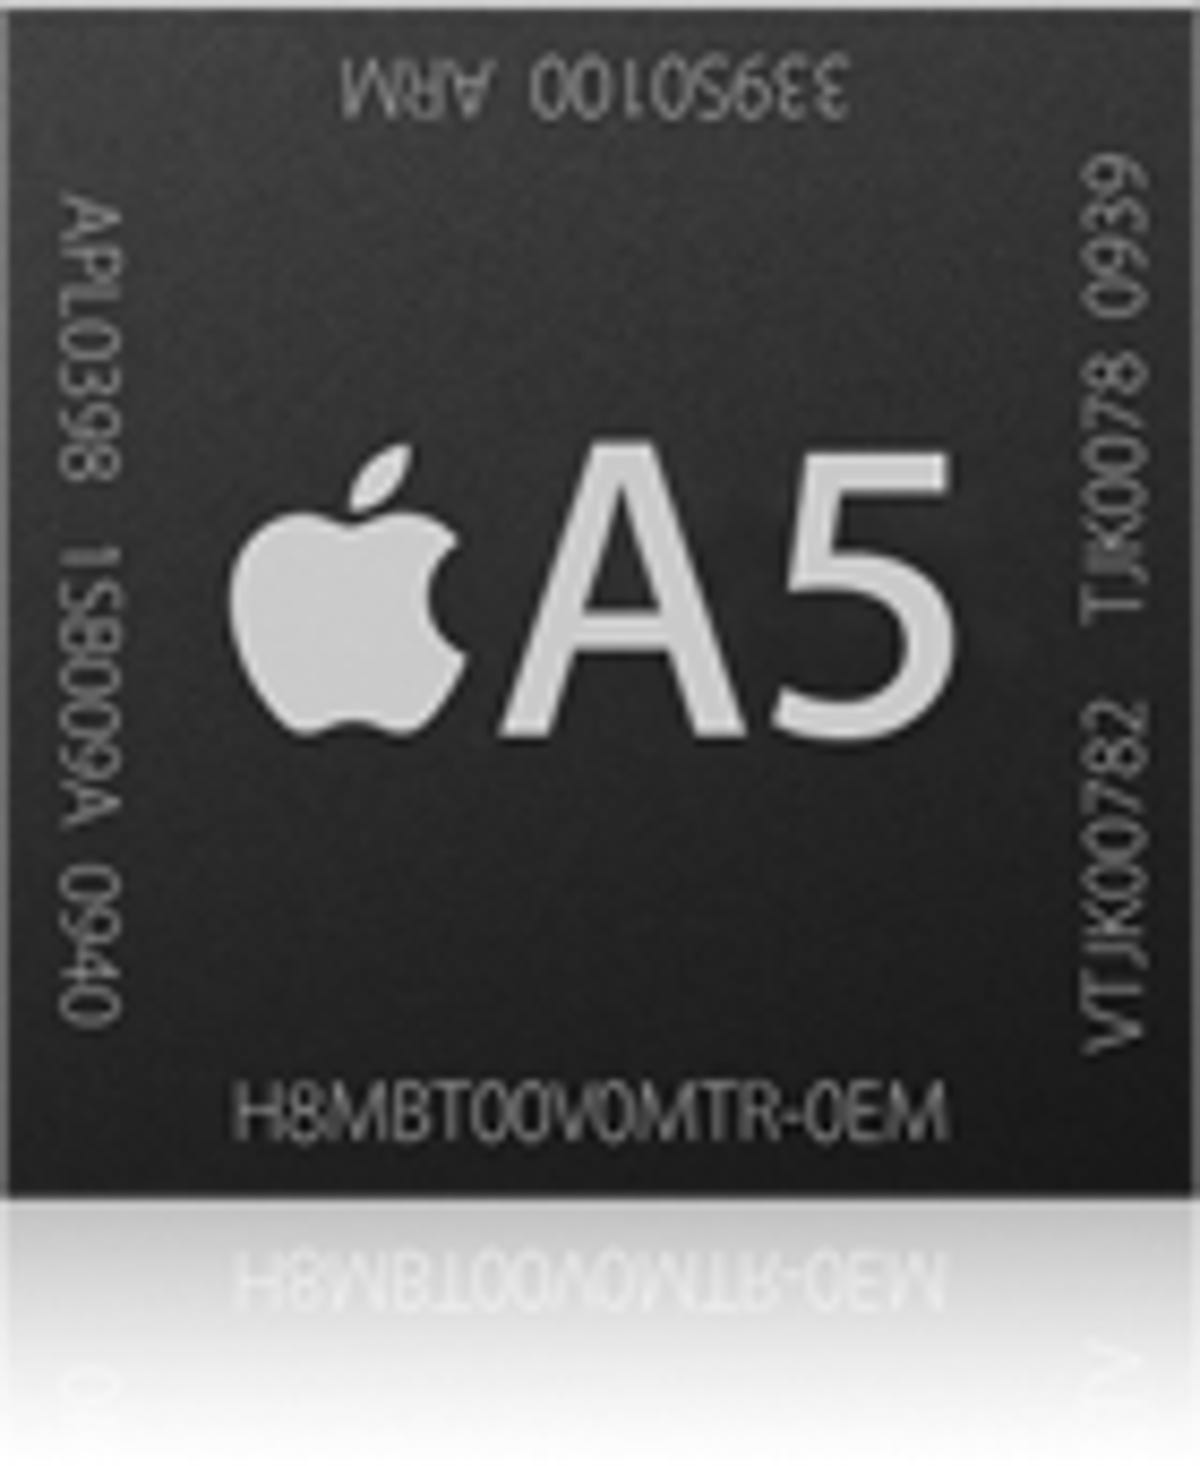 Apple's A5 processor, the first dual-core processor to come in an iPhone.